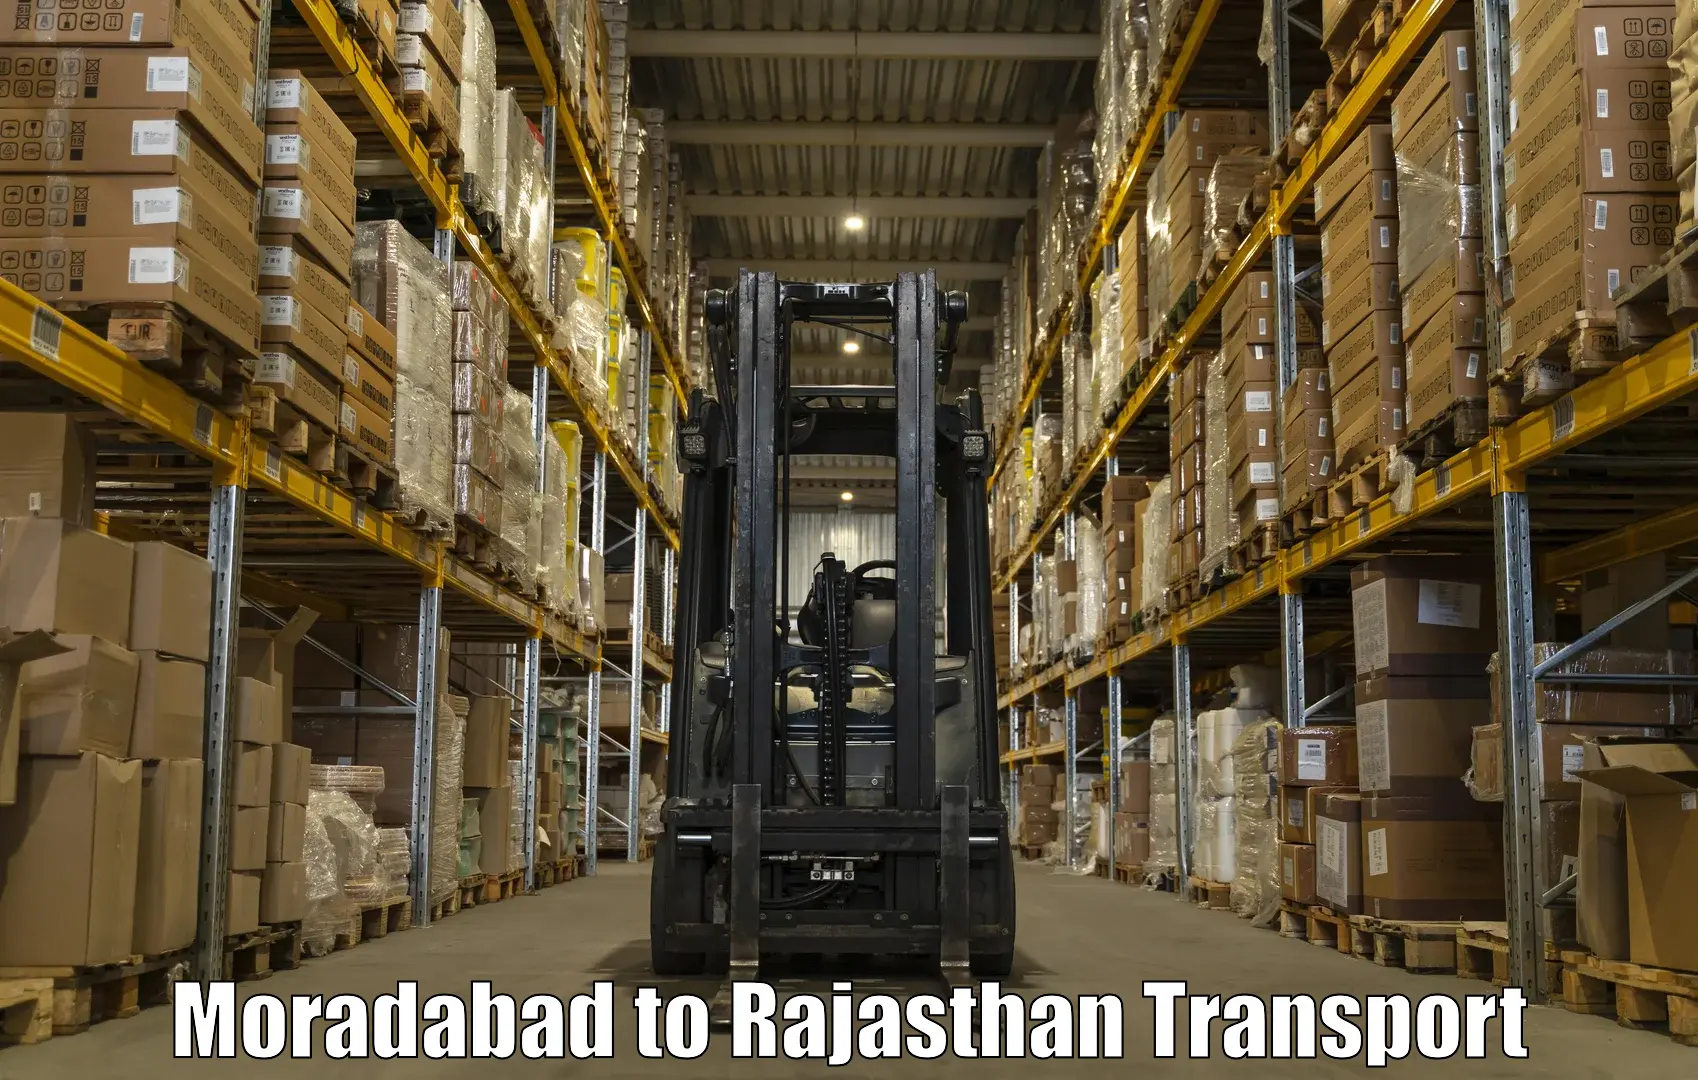 Truck transport companies in India Moradabad to Anupgarh